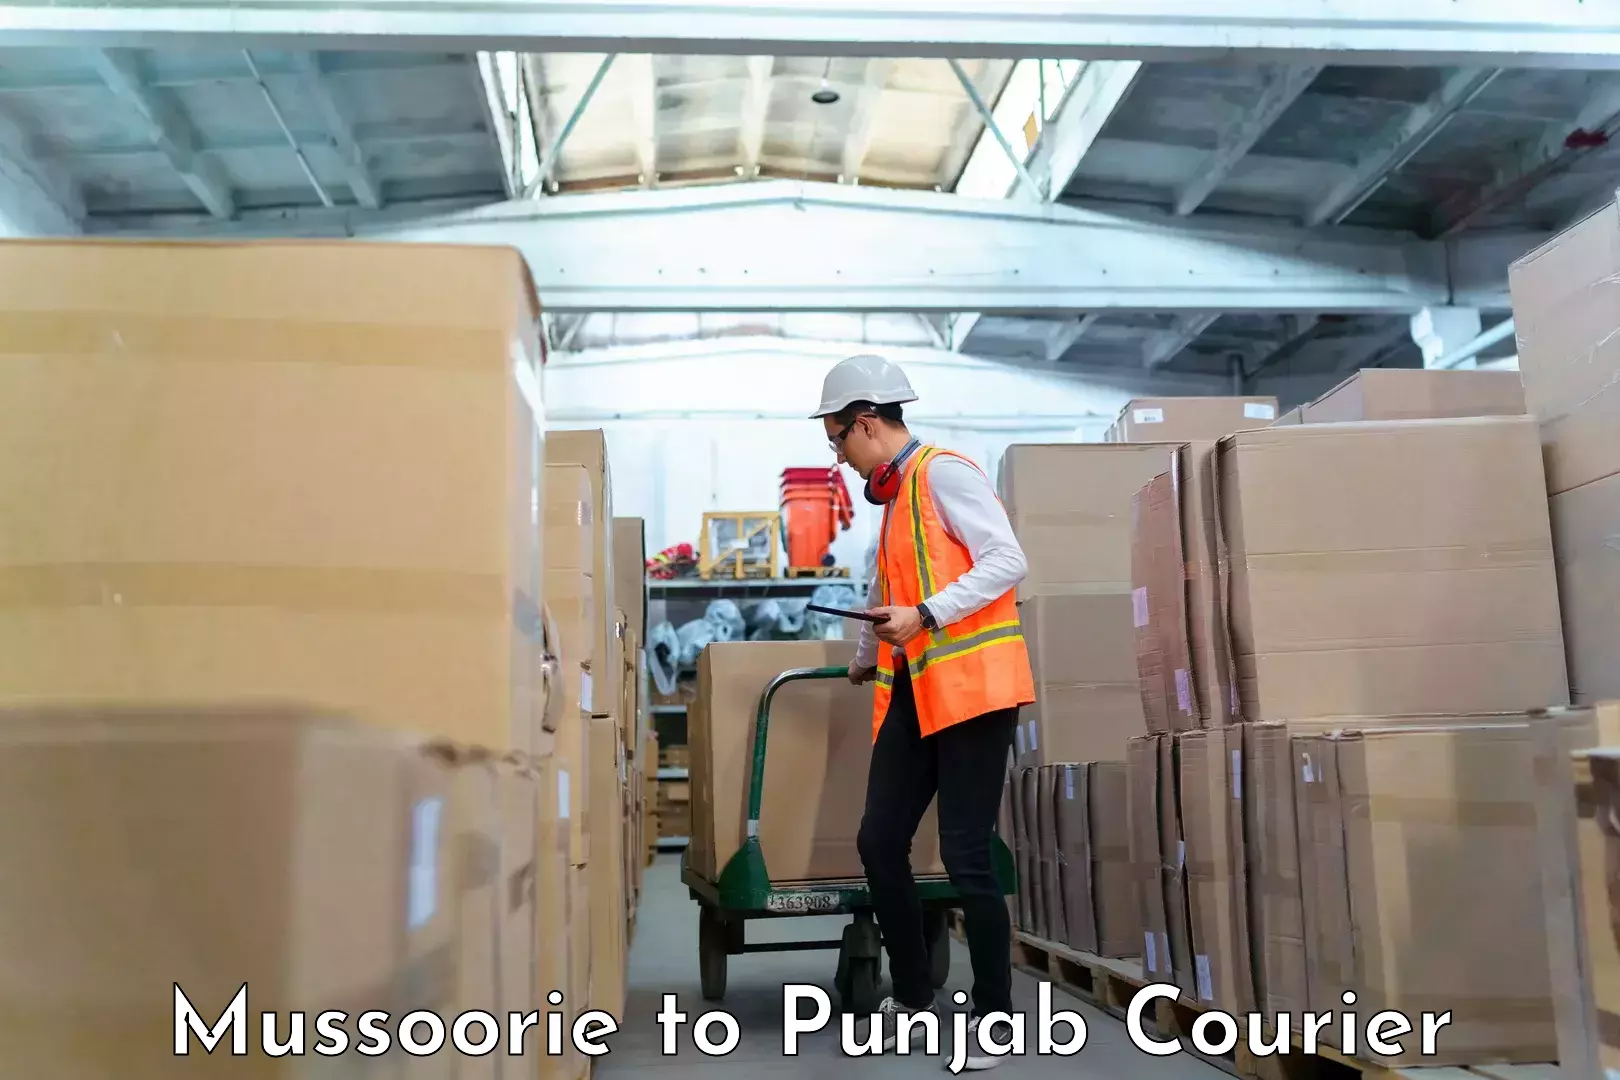 Baggage transport cost Mussoorie to Punjab